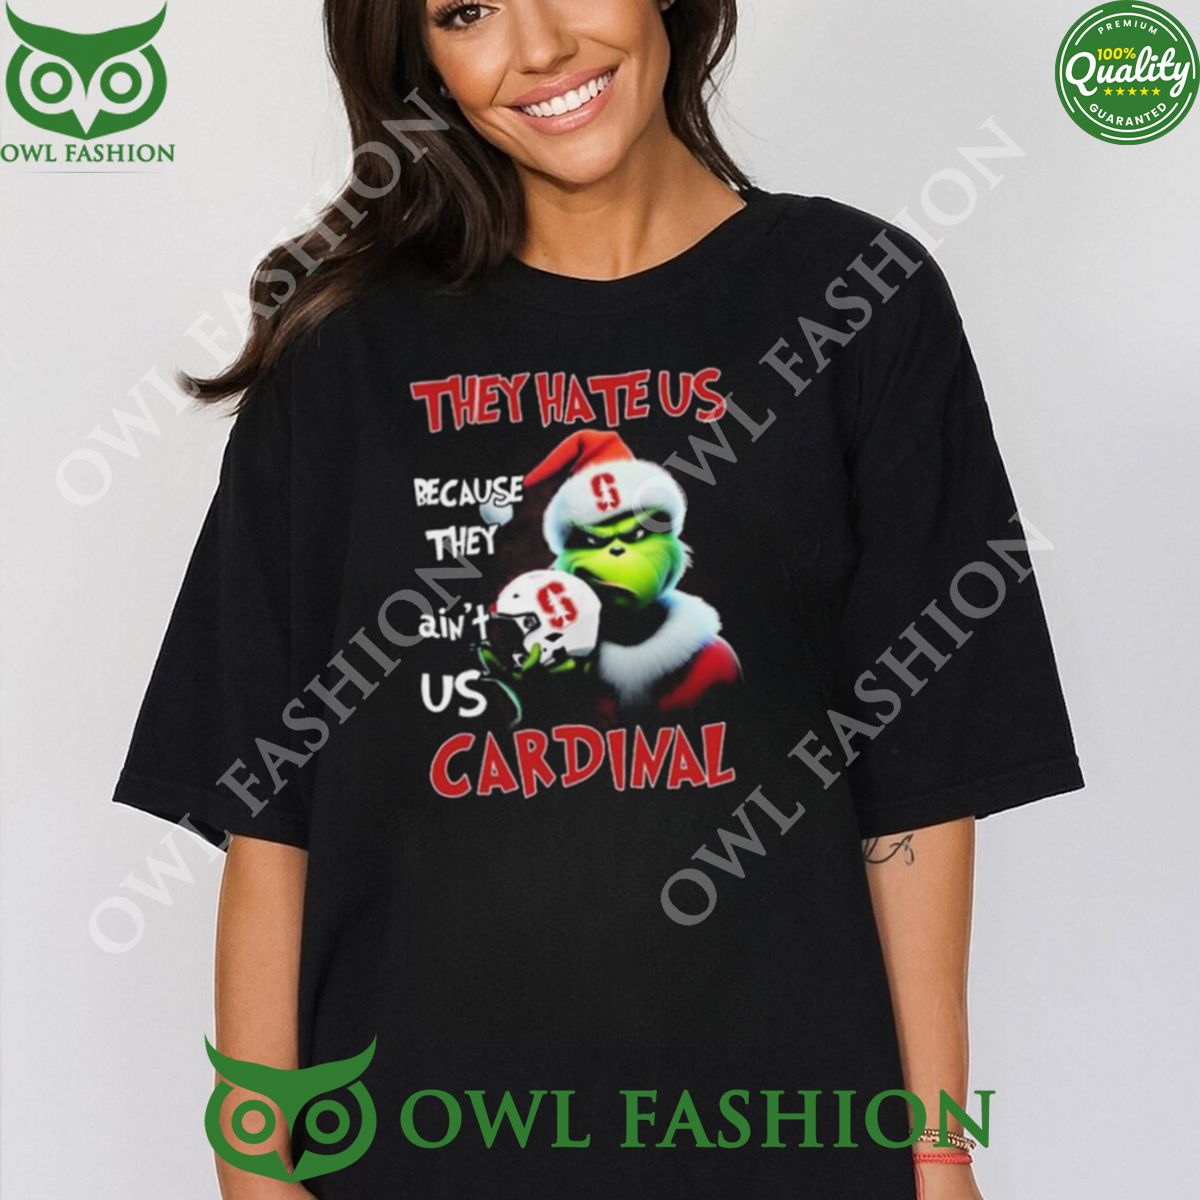 They Hate Us Because Ain’t Us Cardinal Santa Grinch Christmas t Shirt